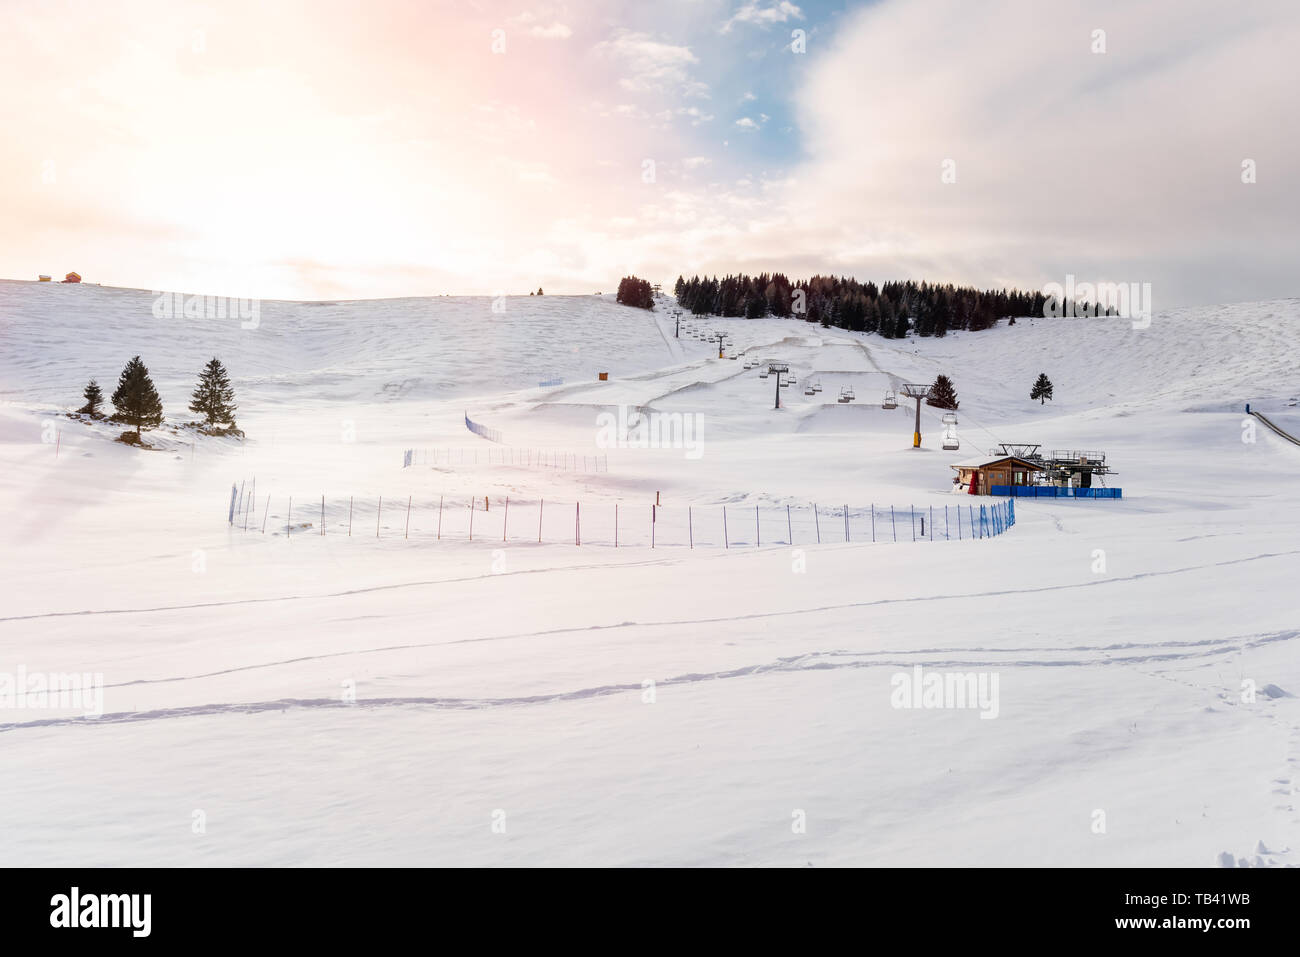 Snowy ski slopes and an empty chairlift in the Alps at sunset Stock Photo